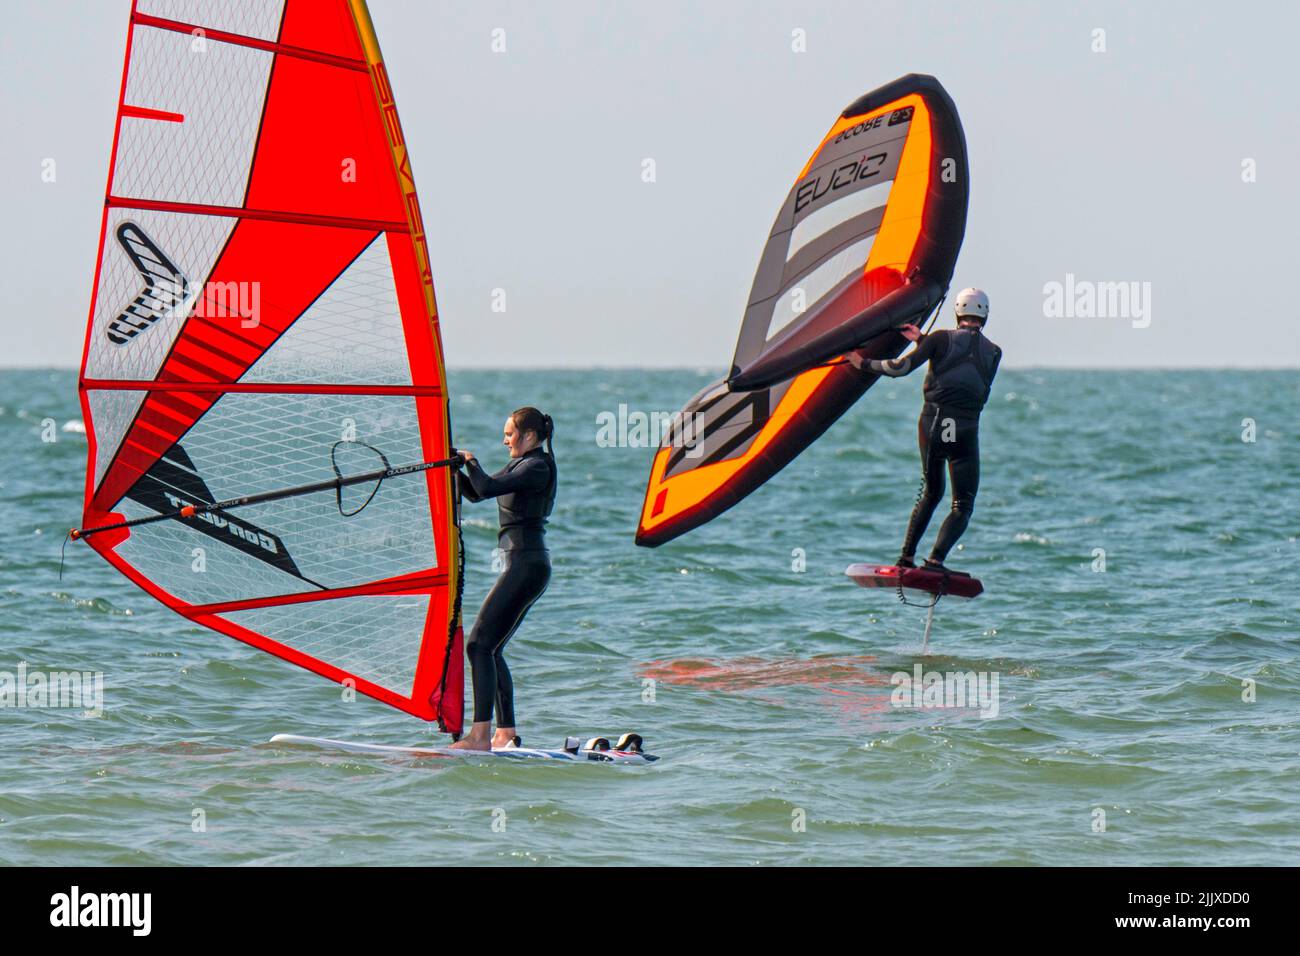 Girl / female recreational windsurfer in black wetsuit practising classic windsurfing and wingboarder / wing boarder wing foiling at sea Stock Photo